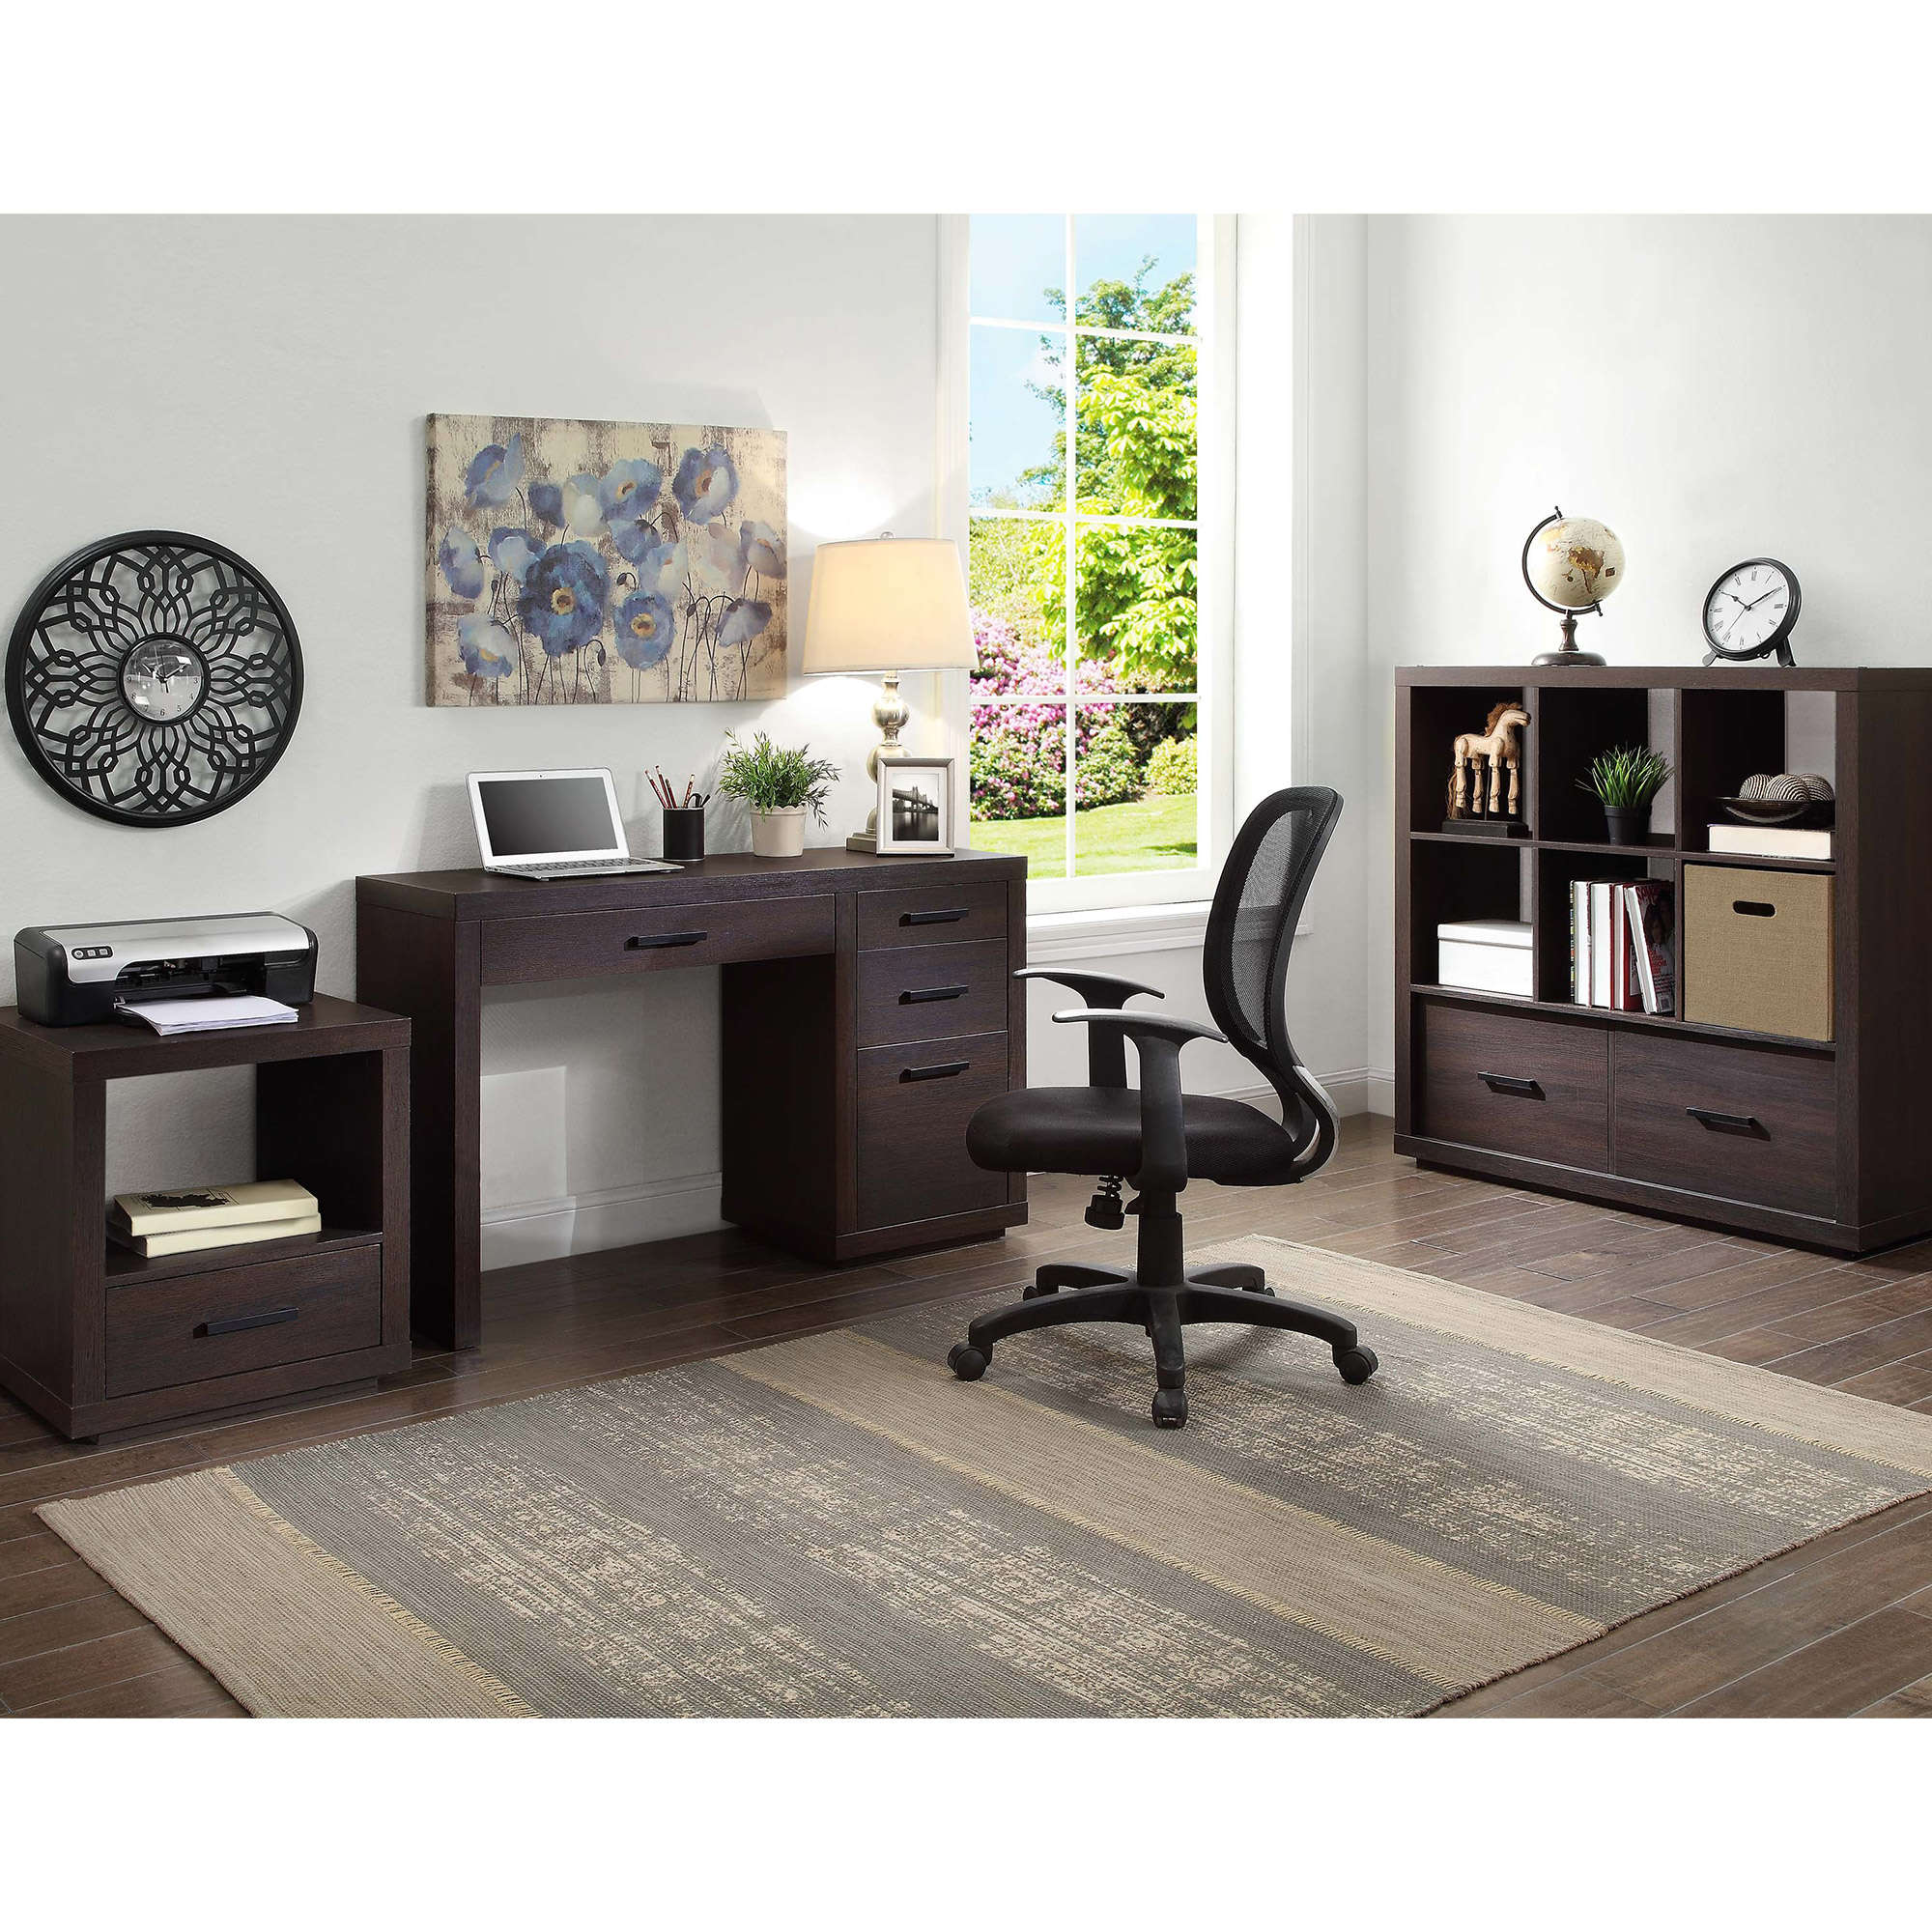 Espresso End Table With Drawer Contemporary Table Living Room Office Bedroom NEW-Wood End Tables-AULEY